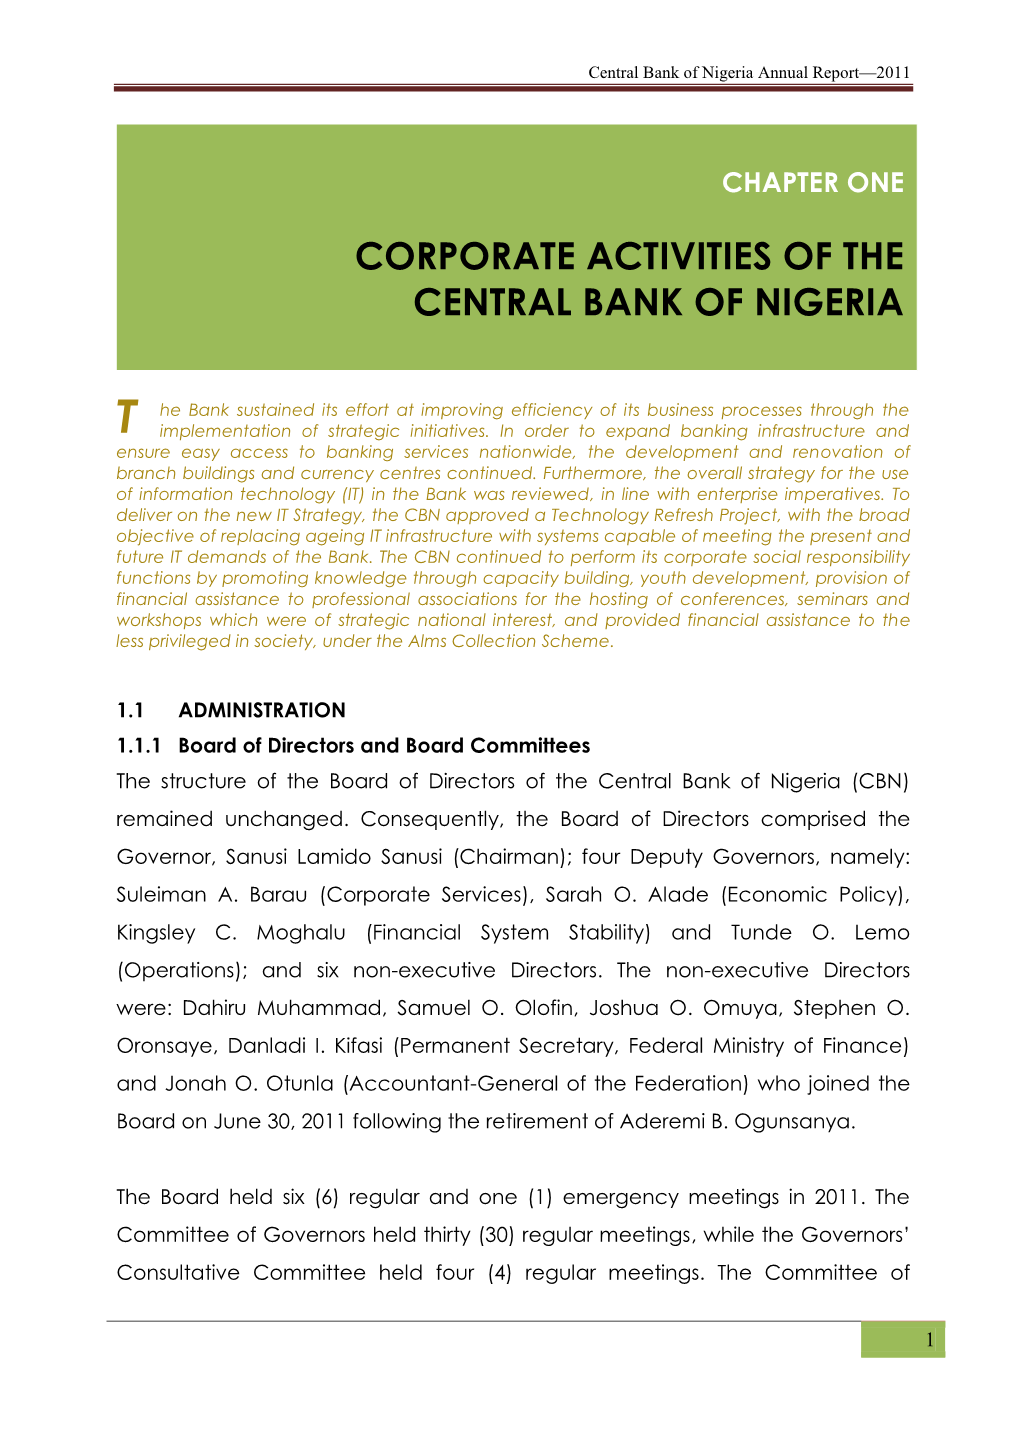 Chapter 1- Corporate Activities of The